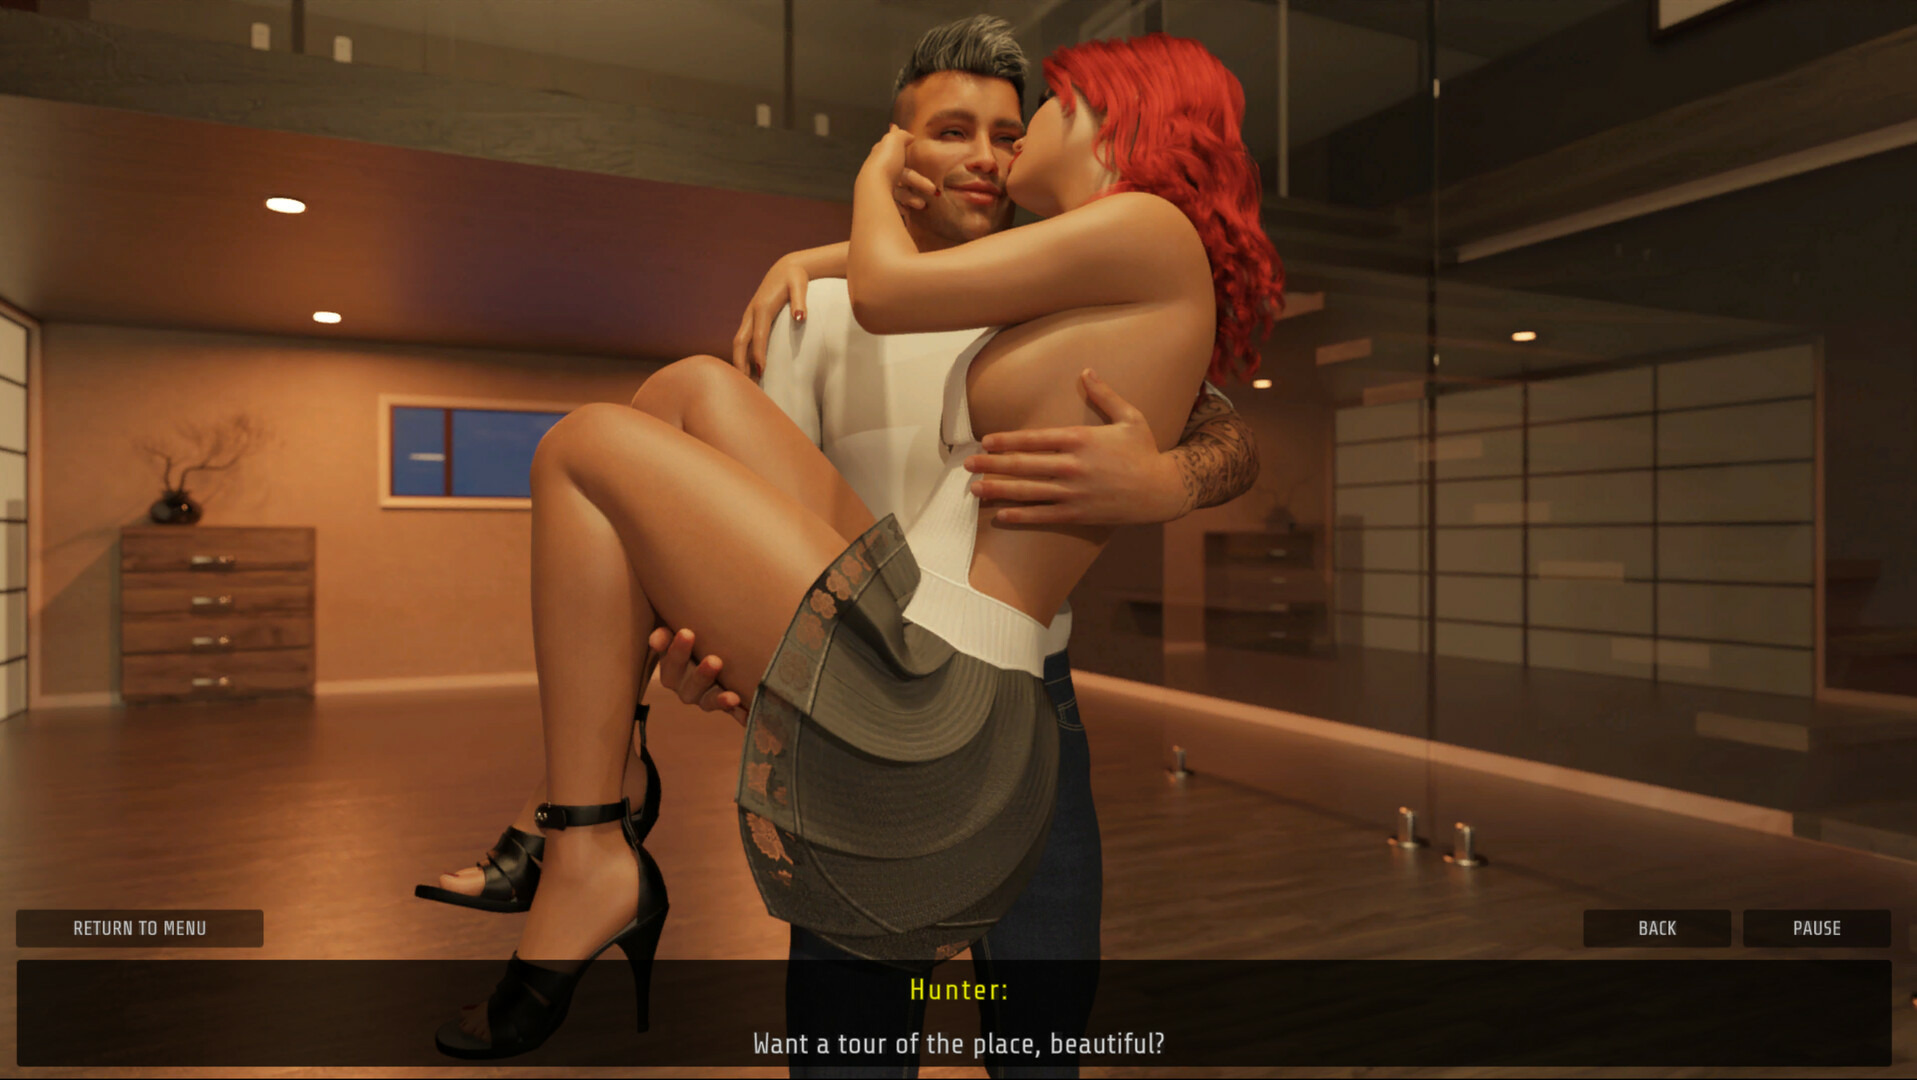 Sex Story - Ruby and Hunter - Episode 2 Steam CD Key, $1.92